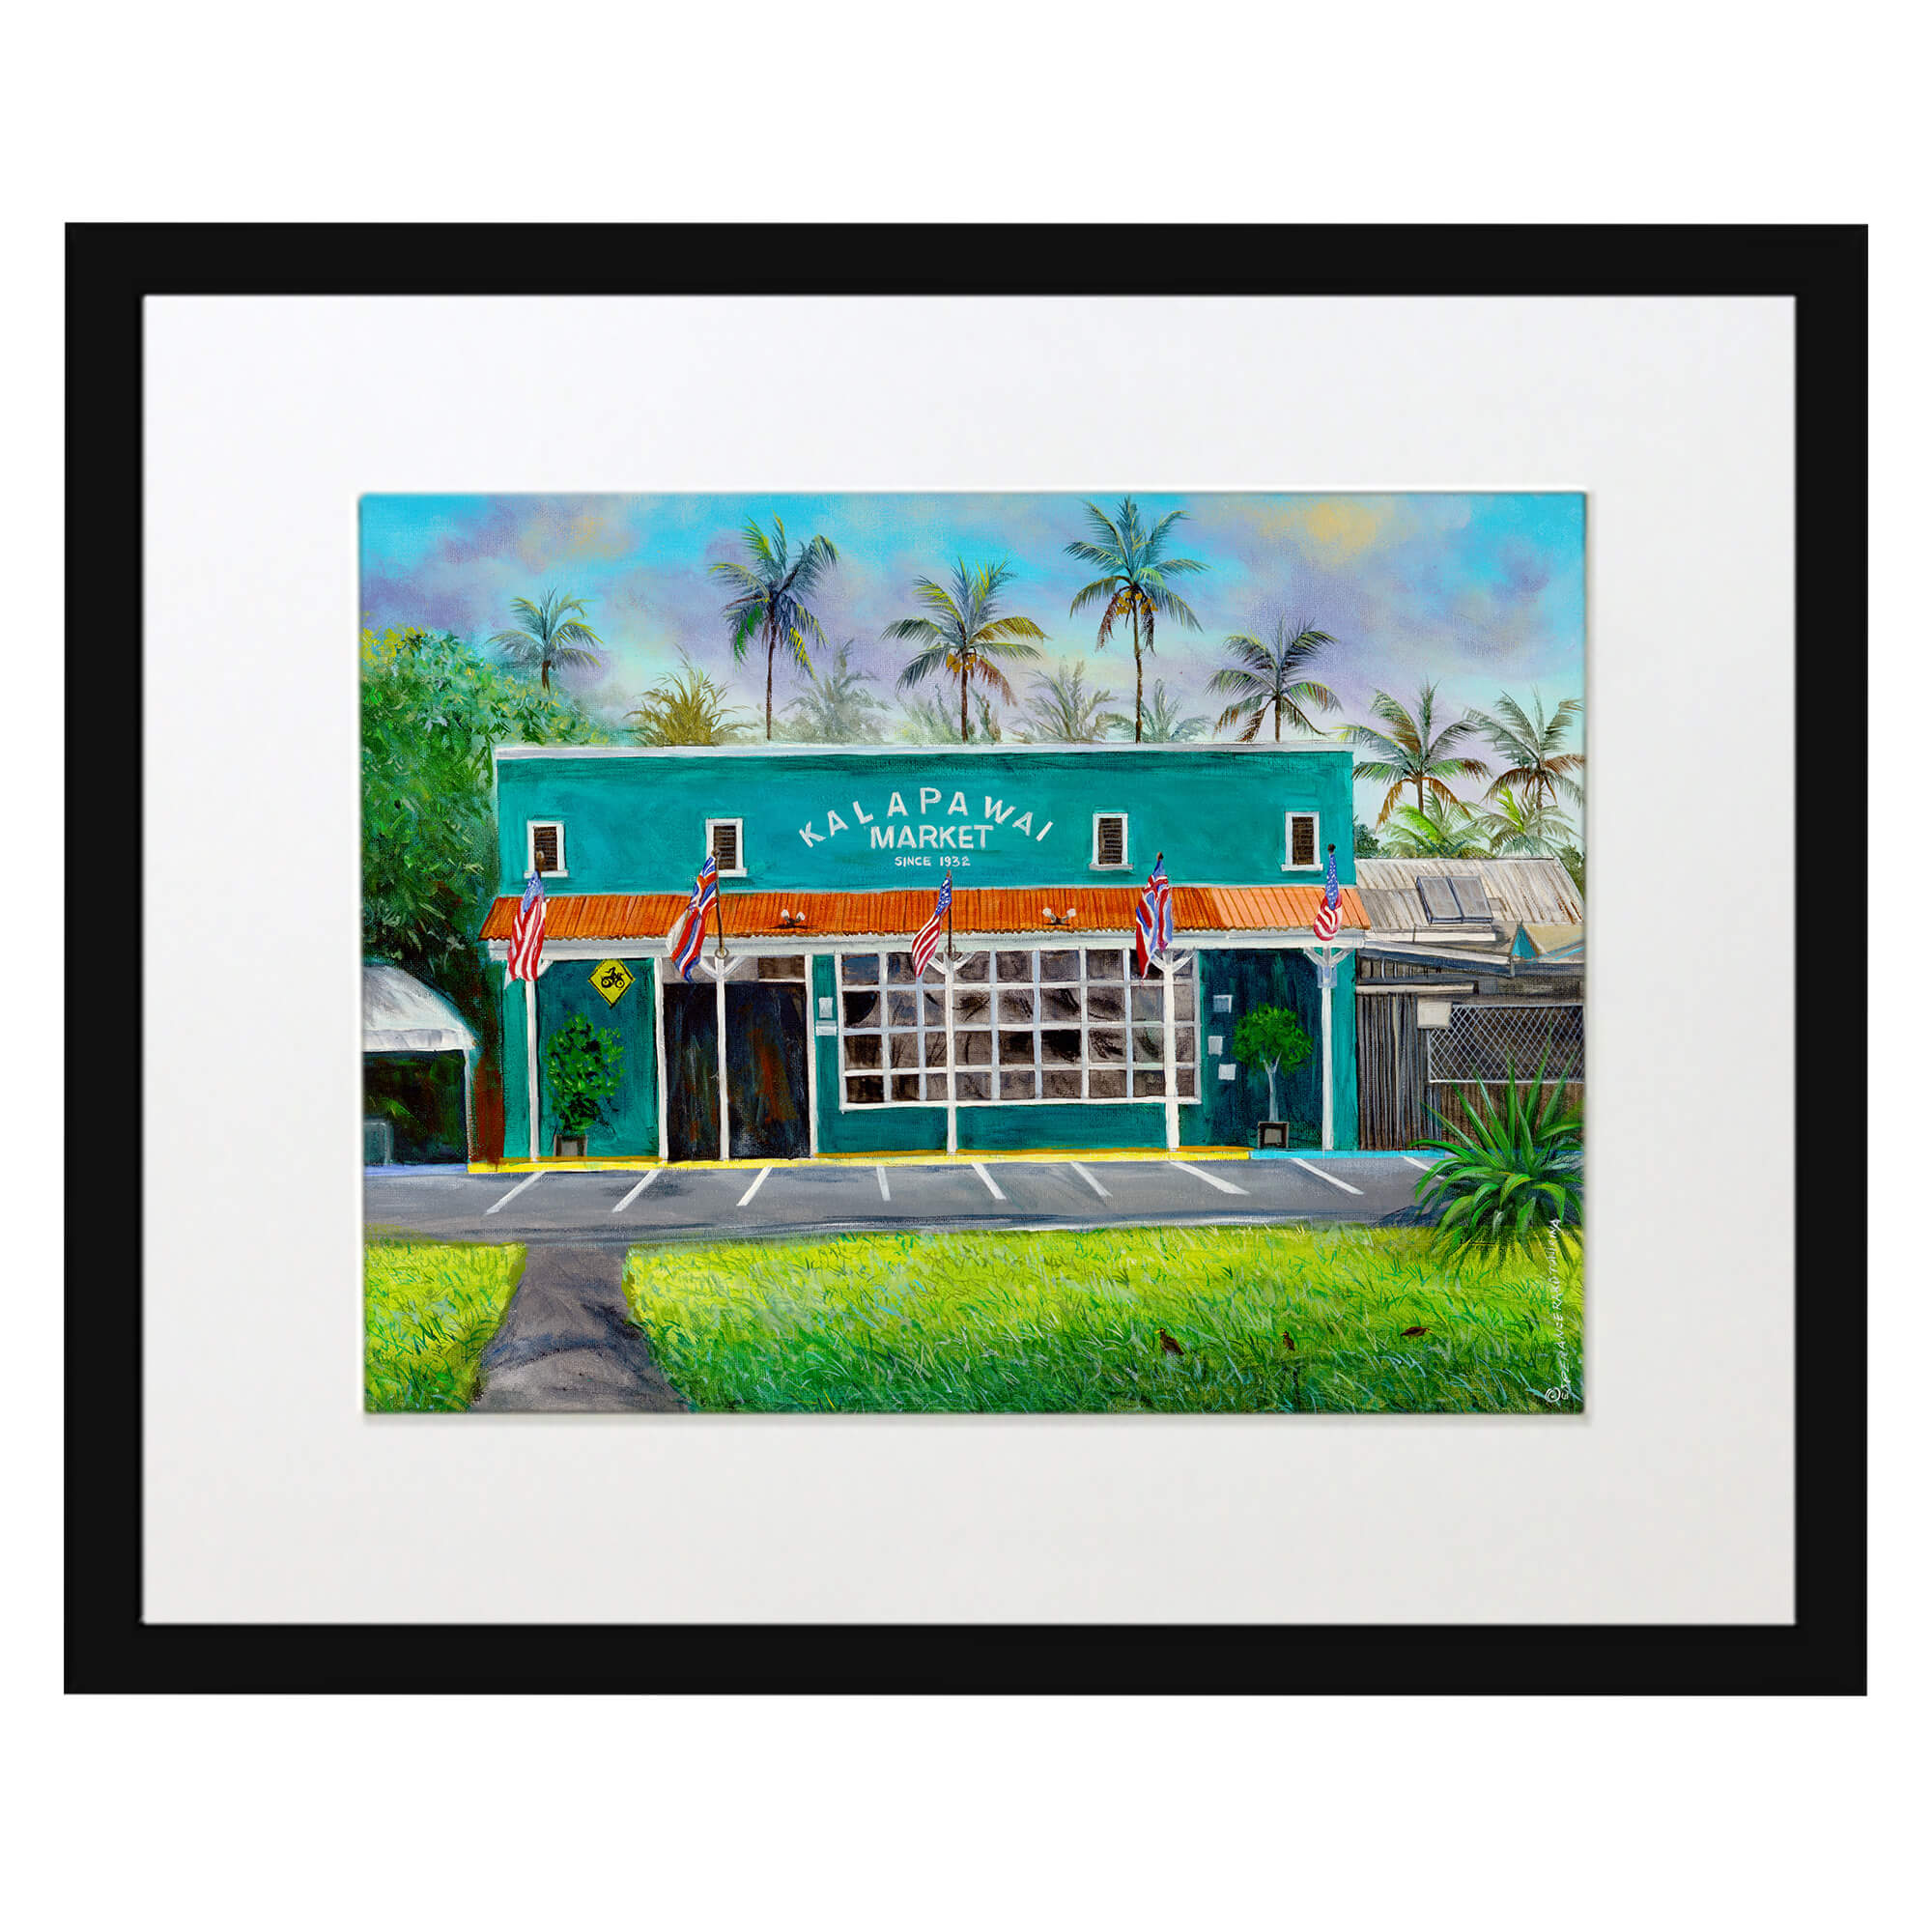 Matted art print with black frame featuring a market surrounded by trees by hawaii artist Esperance Rakotonirina